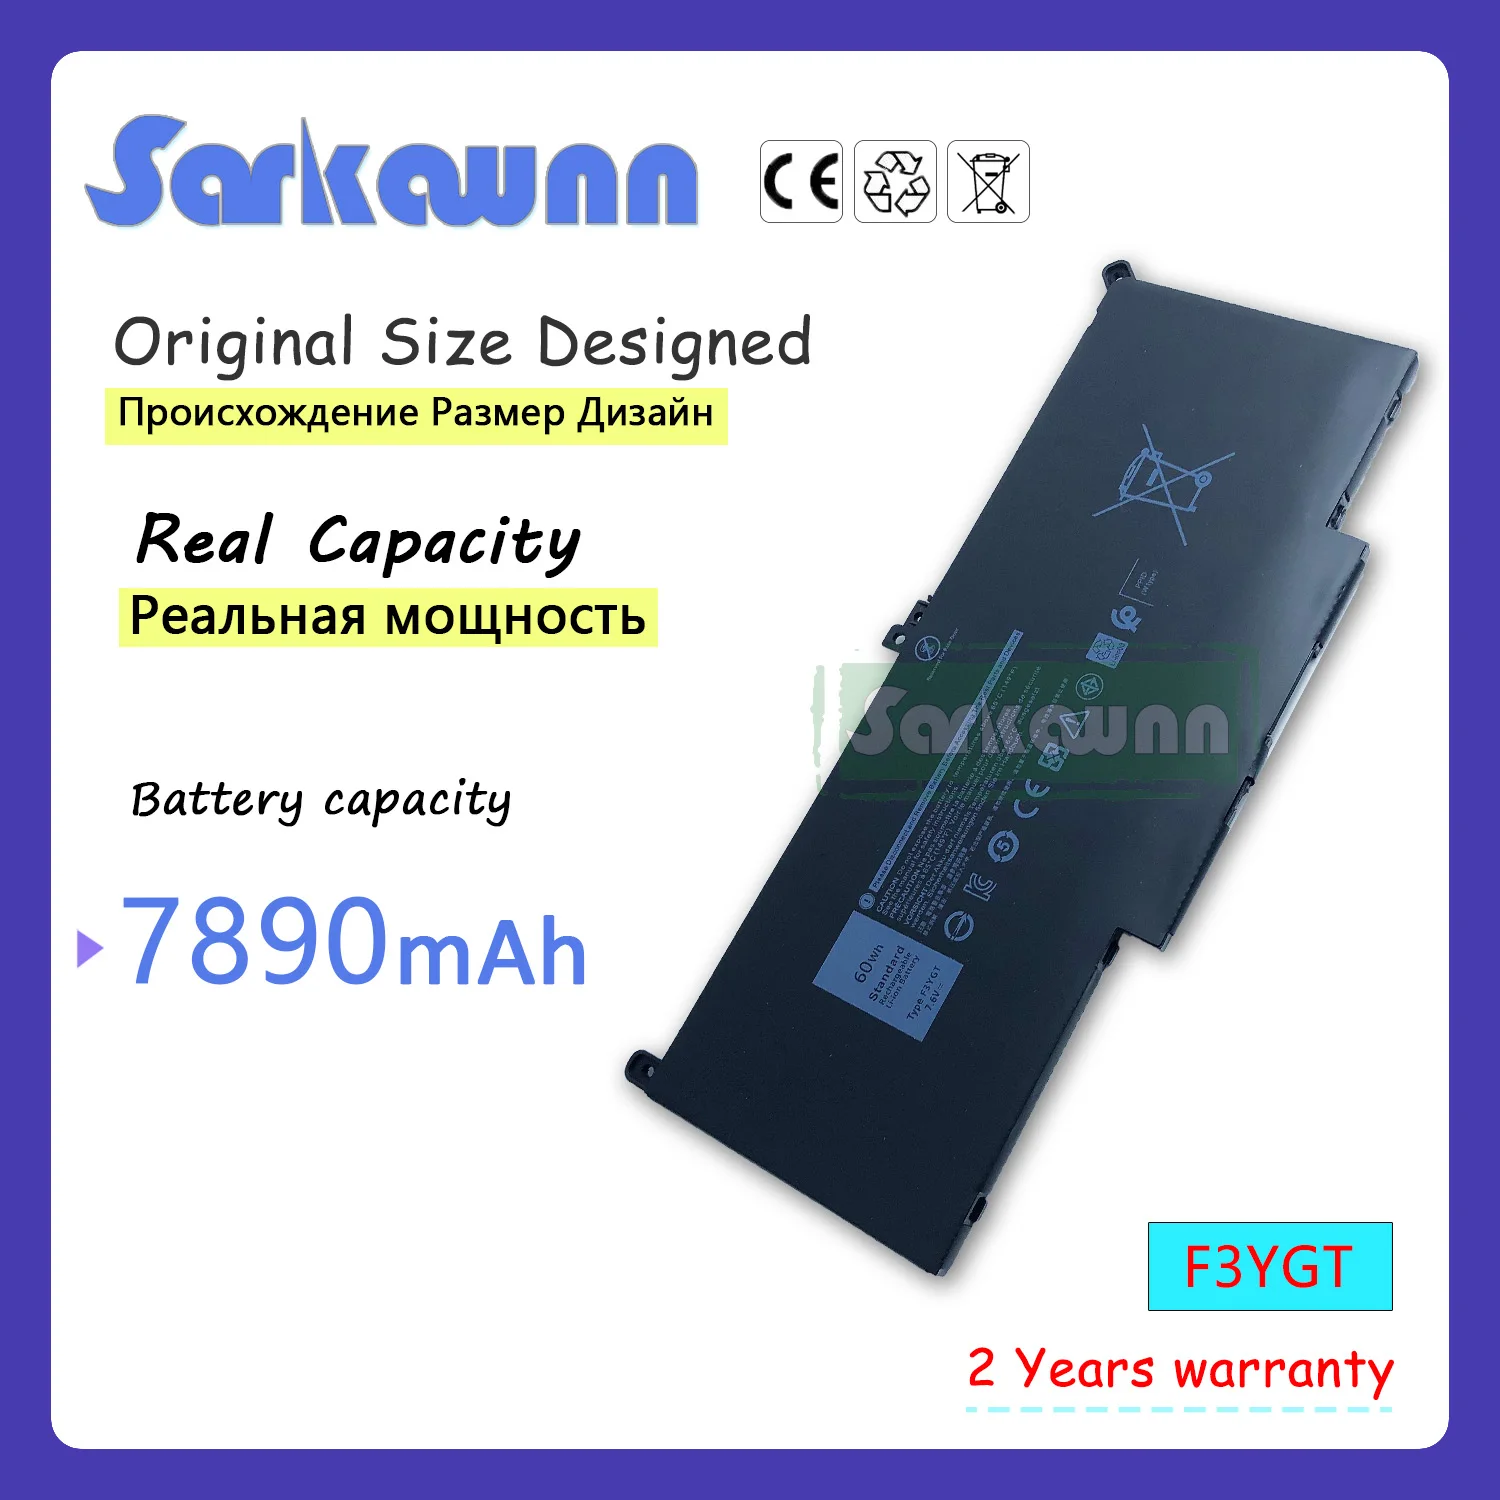 

Sarkawnn F3YGT Laptop Battery For DELL Latitude 12 7280 E7290 E7380 E7390 E7480 E7490 DM3WC 0DM3WC 2X39G 7.6V 60Wh 7900mAh NEW